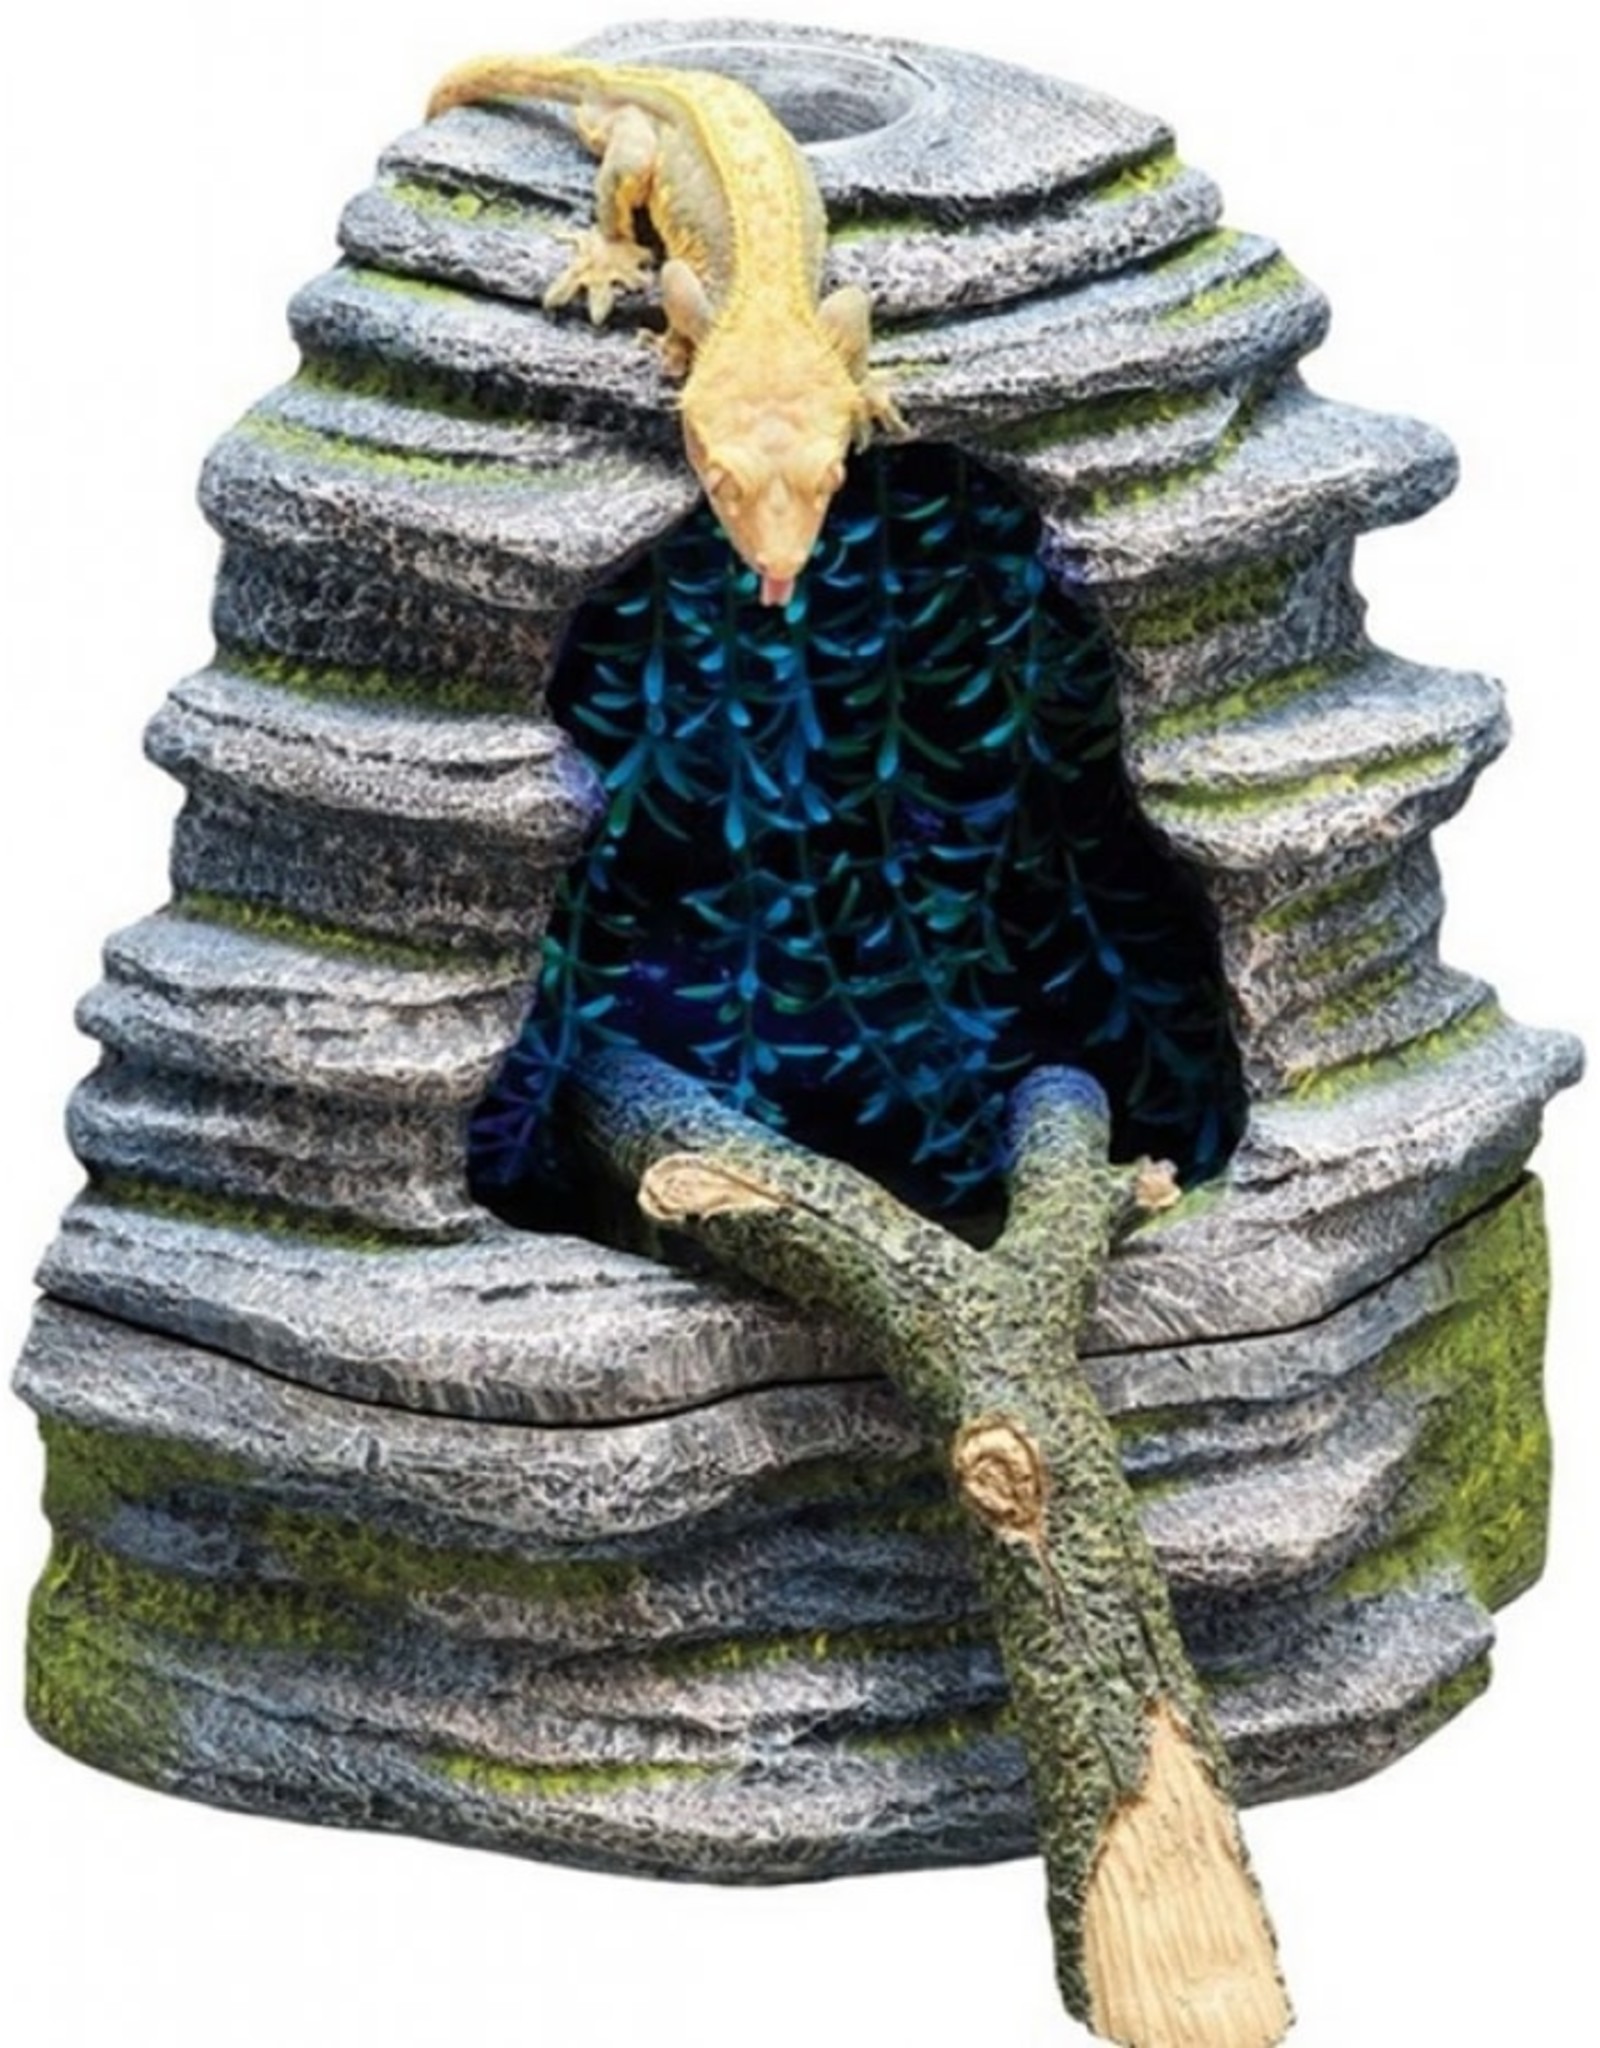 ZILLA PET PRODUCTS ZILLA- TERRARIUM- NATRUALISTIC- SPRING CAVE FOUNTAIN- 13.50X10X10- WITH BLUE LED